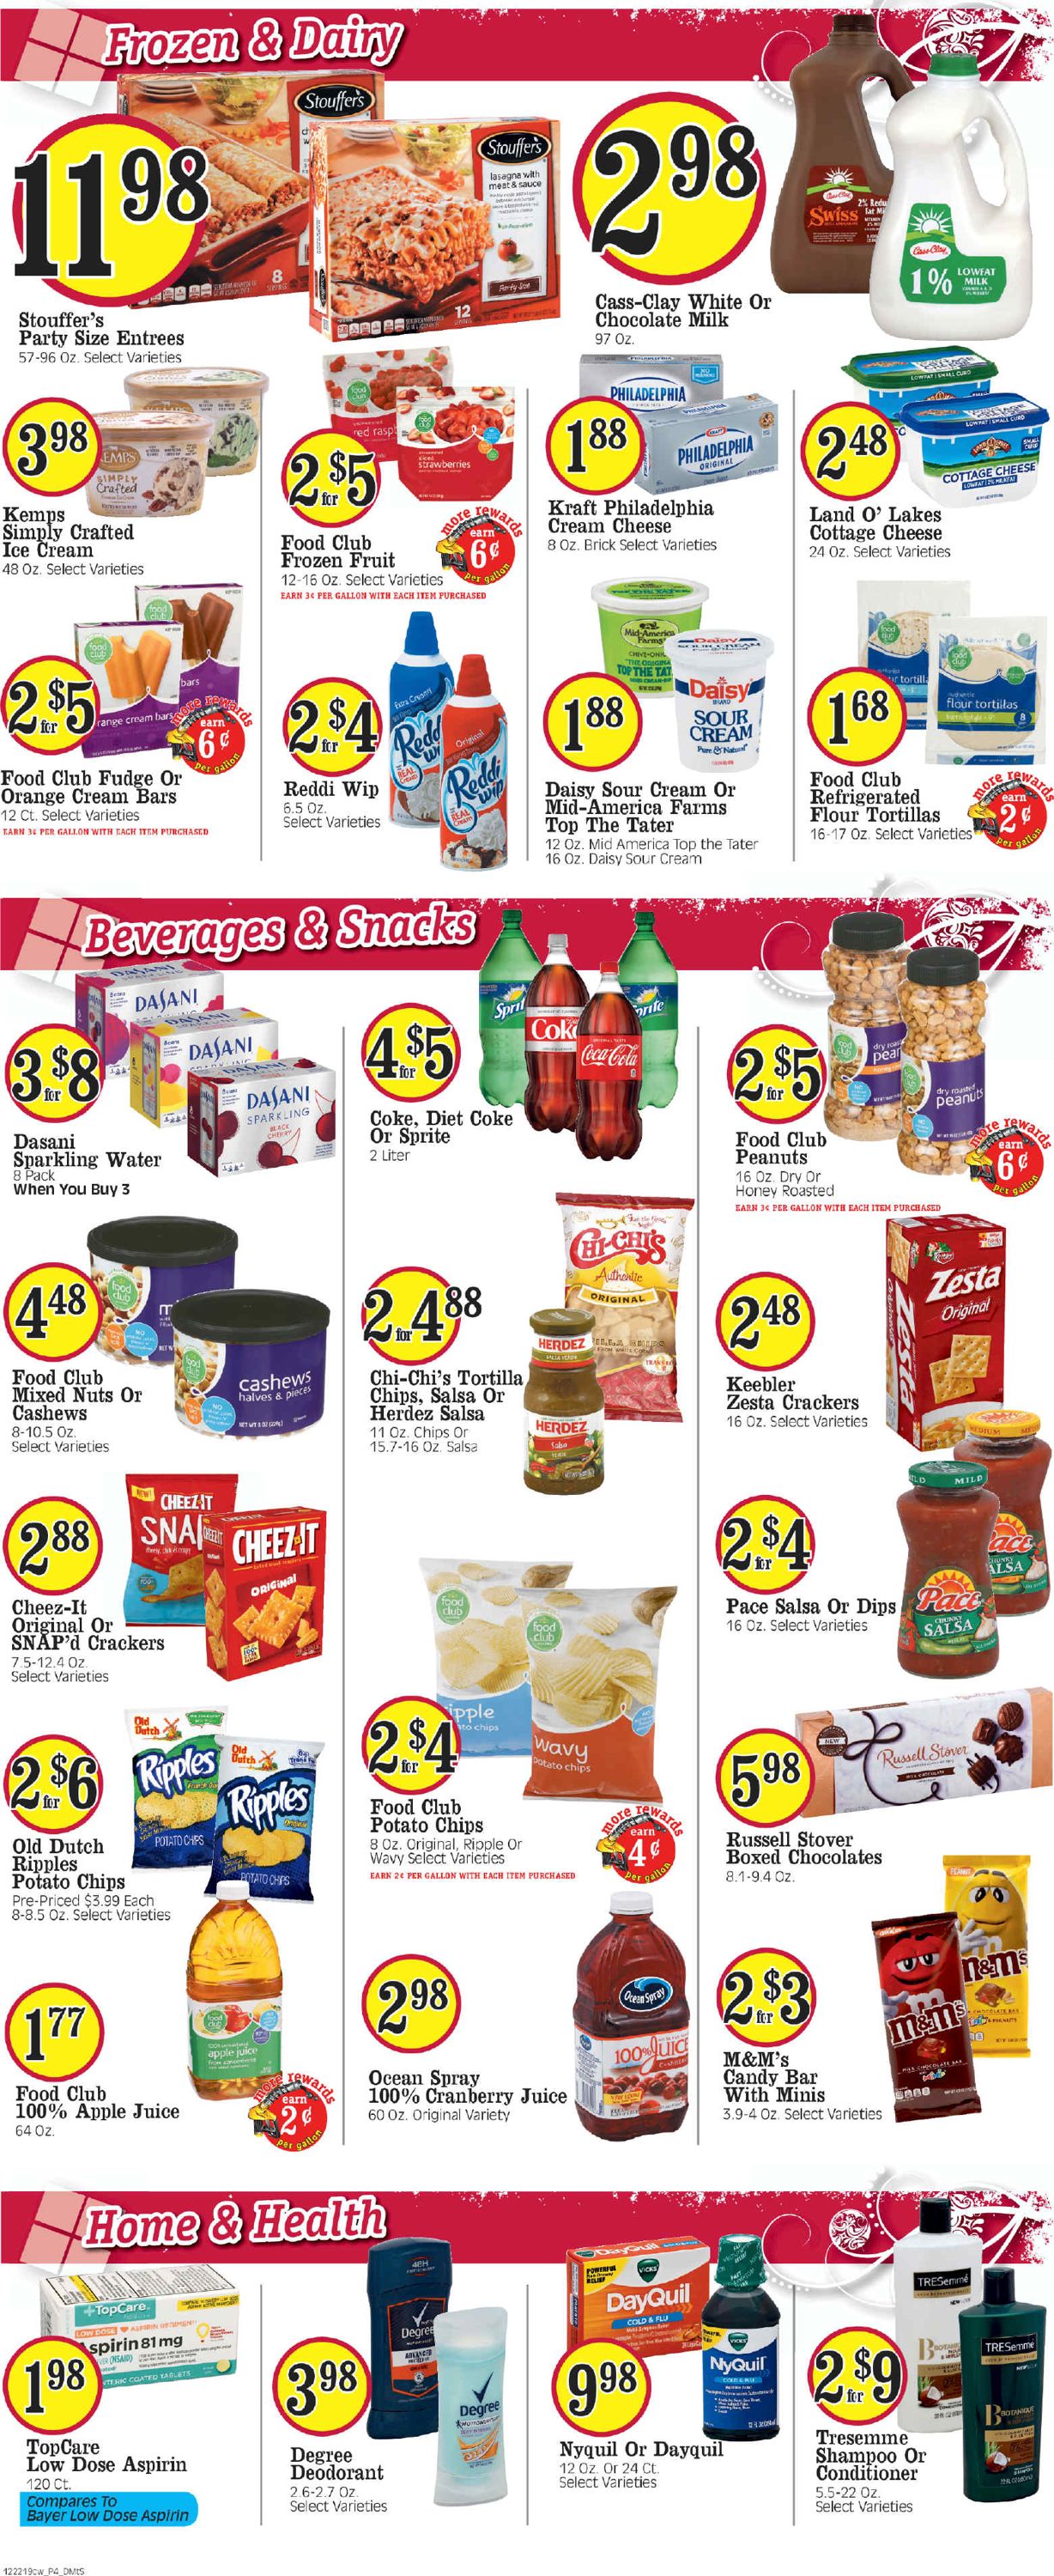 Cash Wise - New Year's Ad 2019/2020 Weekly Ad Circular - valid 12/25-12/31/2019 (Page 4)